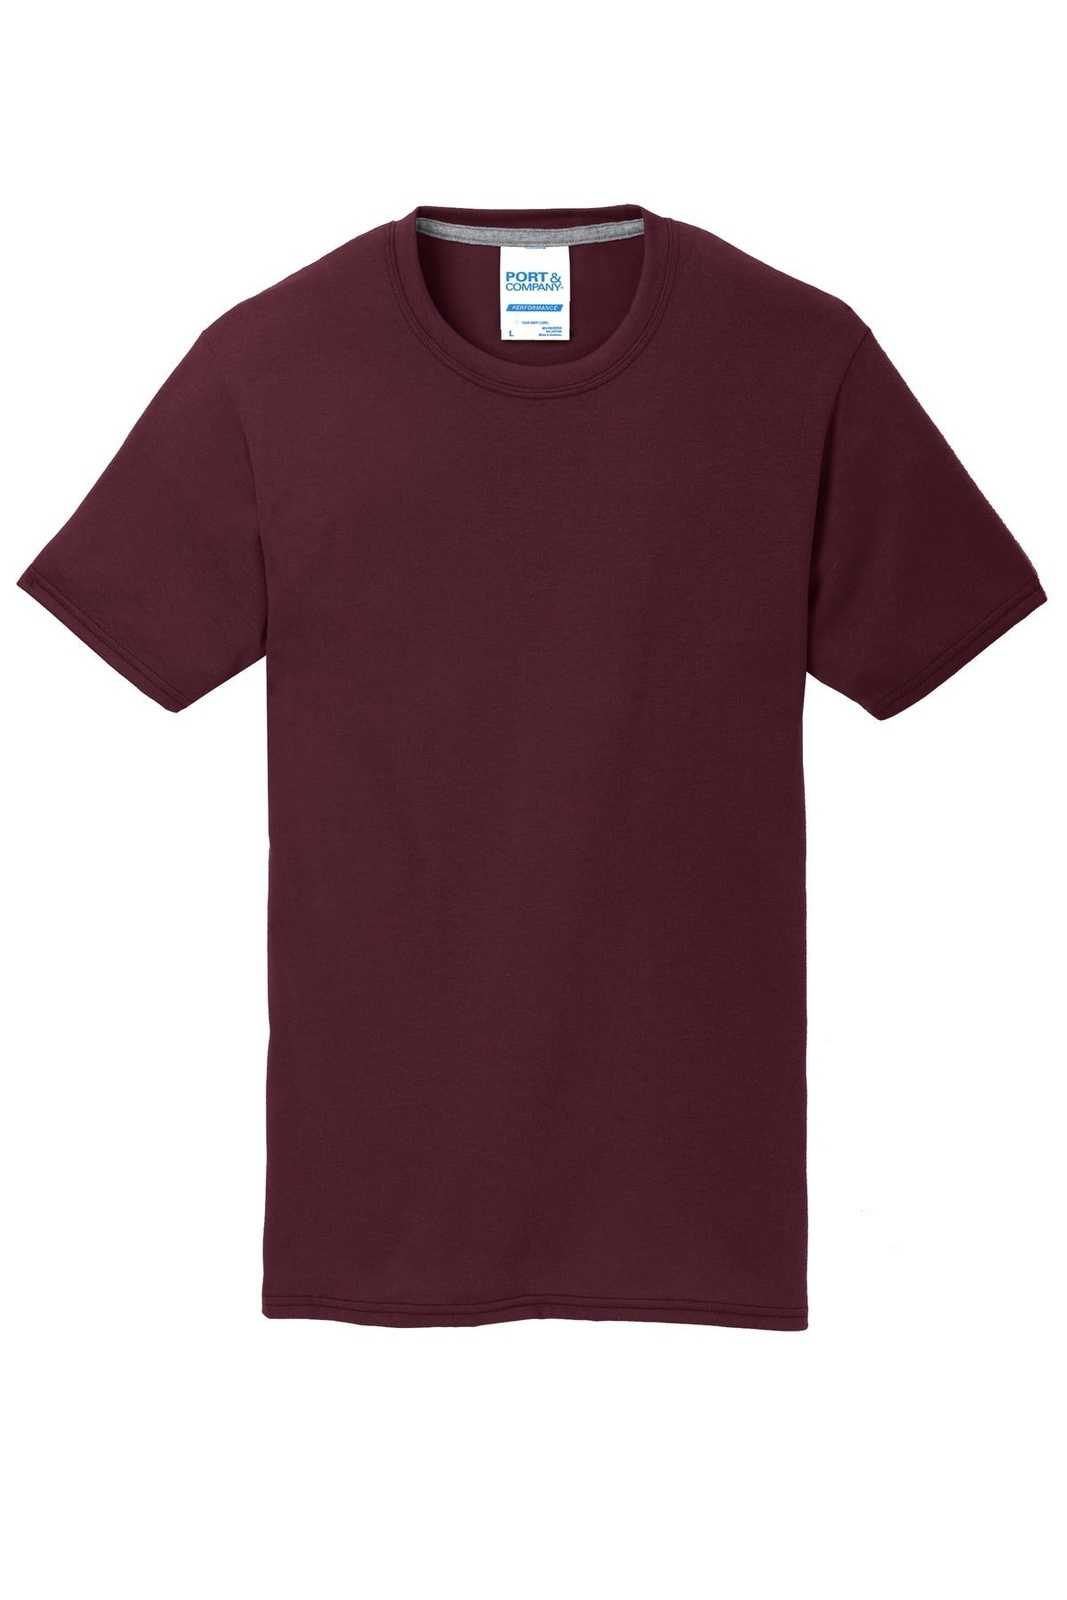 Port &amp; Company PC381 Performance Blend Tee - Athletic Maroon - HIT a Double - 5